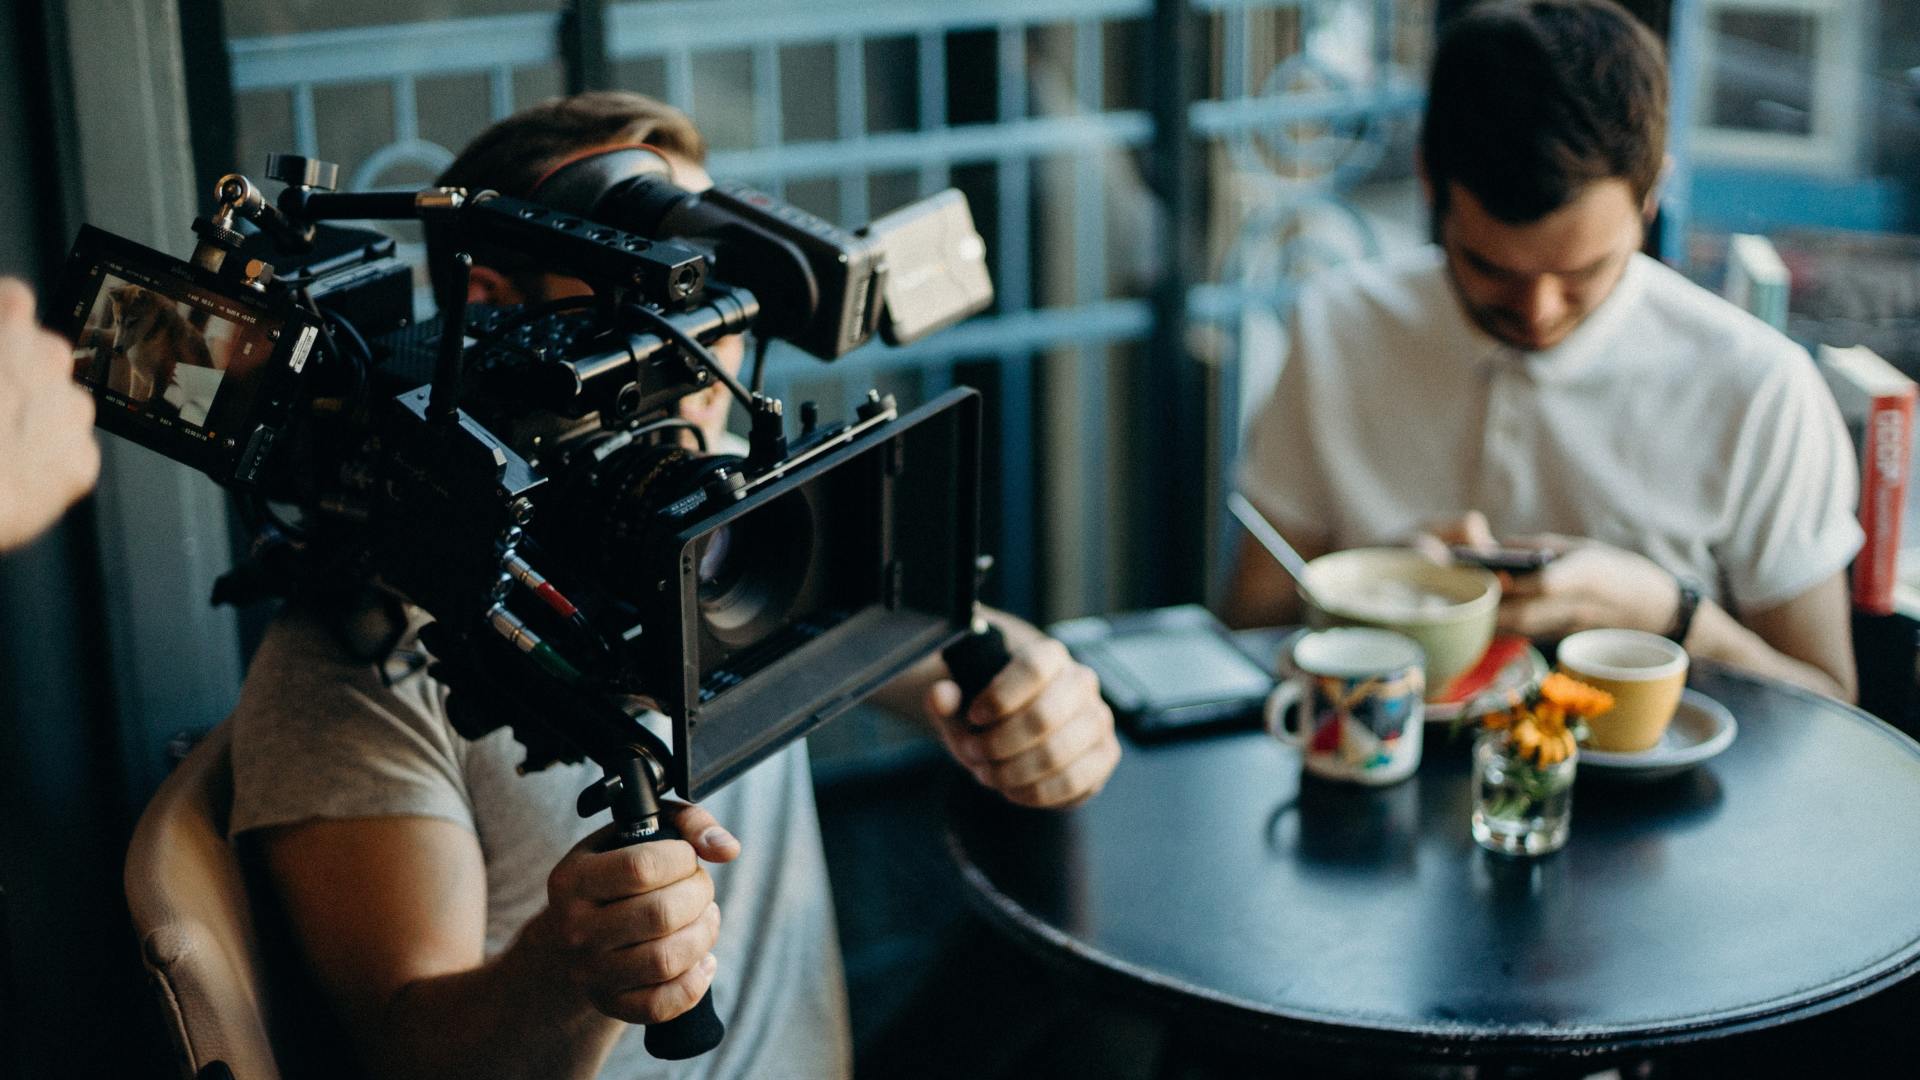 Behind the scenes image of cameraman holding a cinema camera while an actor sits in coffee shop using phone.